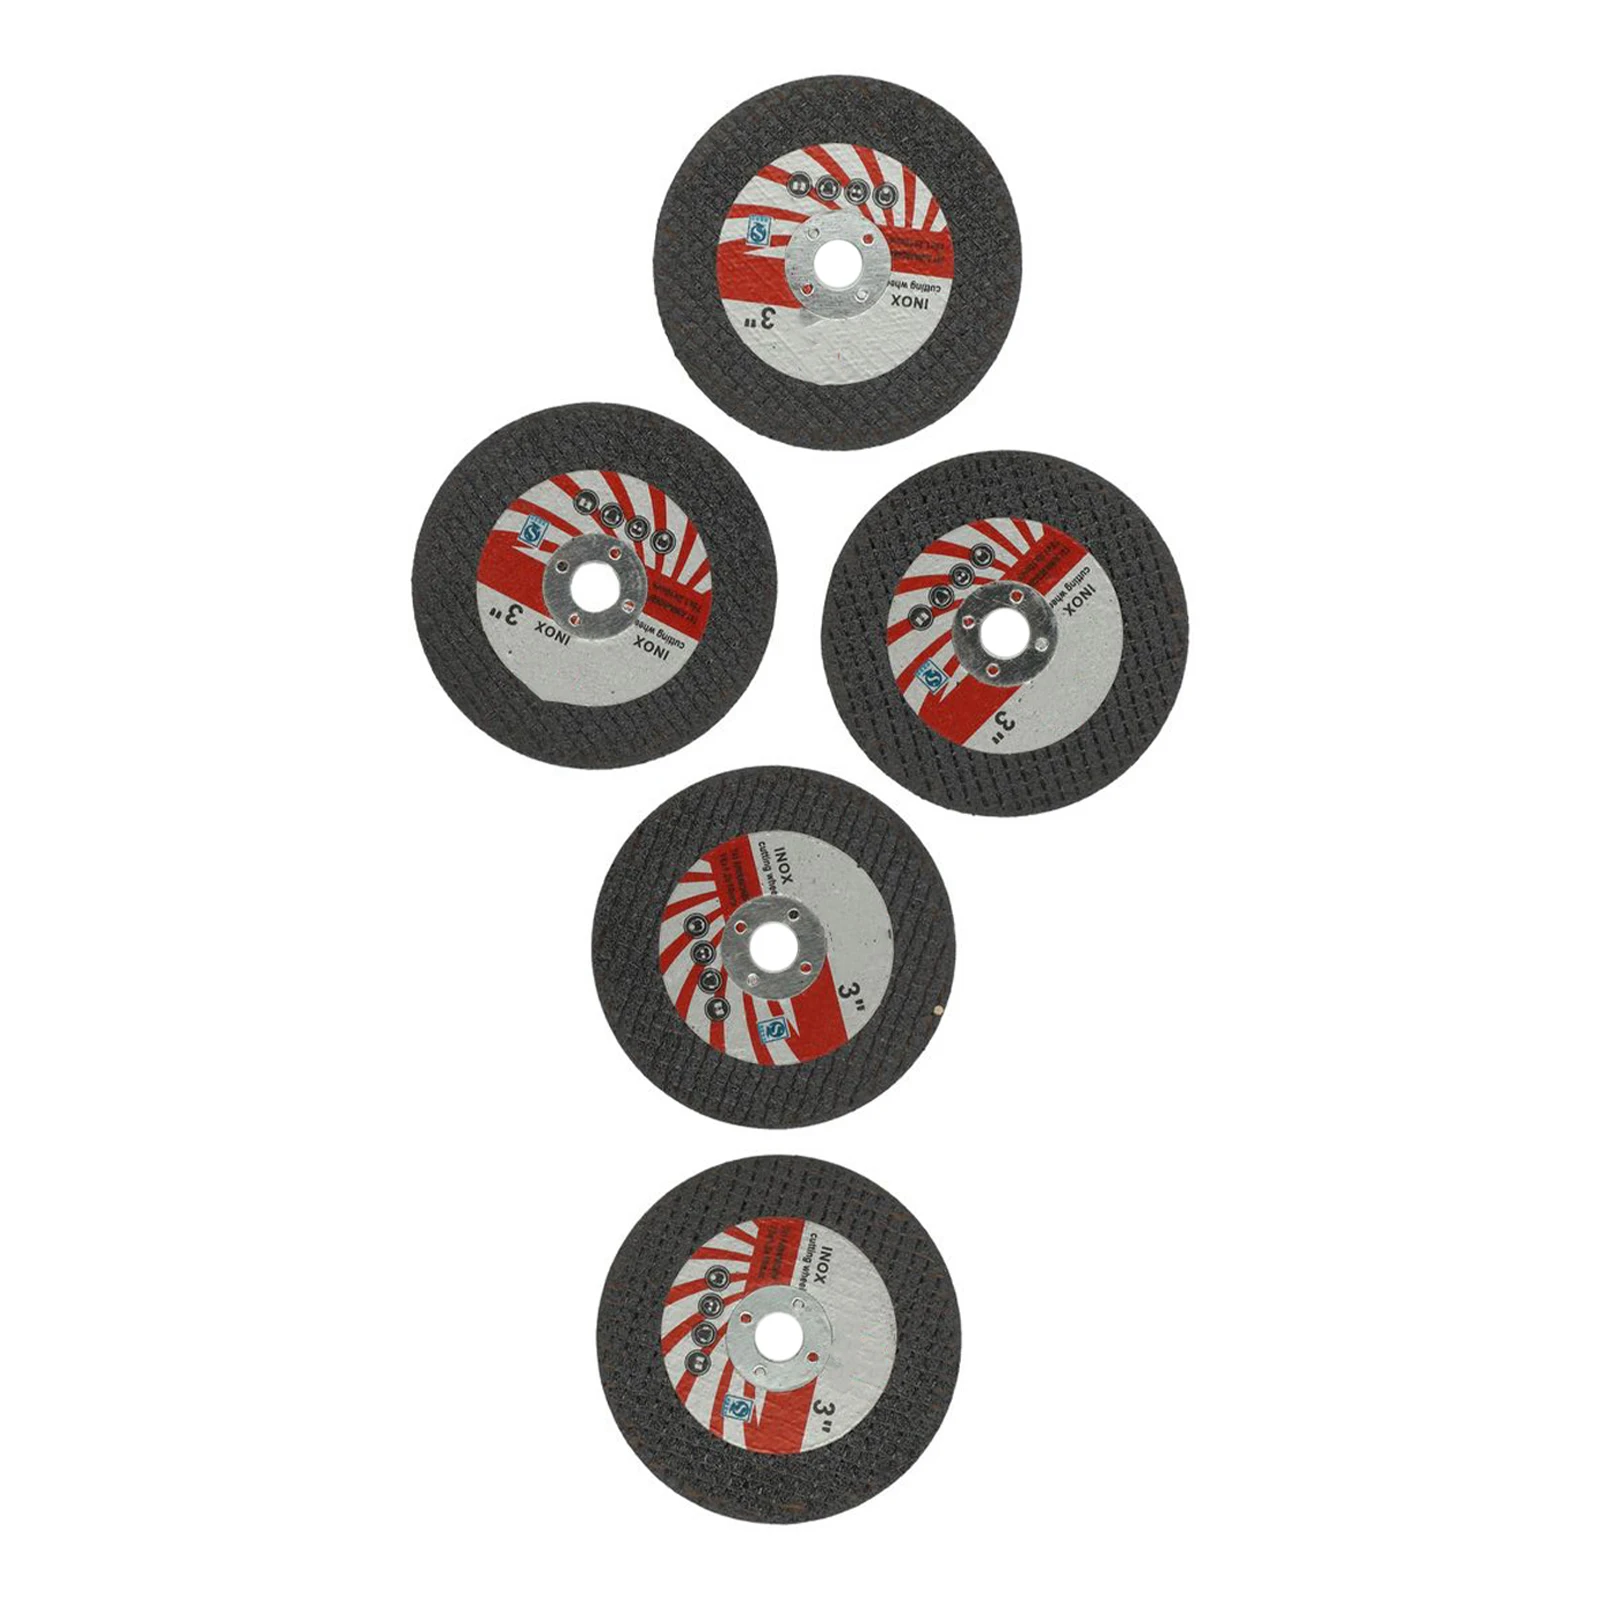 5pcs 75mm Mini Cutting Disc Circular Resin Grinding Wheel Saw Blade Angle Grinder Attachment Cutting Polishing Disc Kit 5pcs 75mm circular resin saw blade grinding wheel cutting disc steel stone cutting for angle grinder power tools accessories